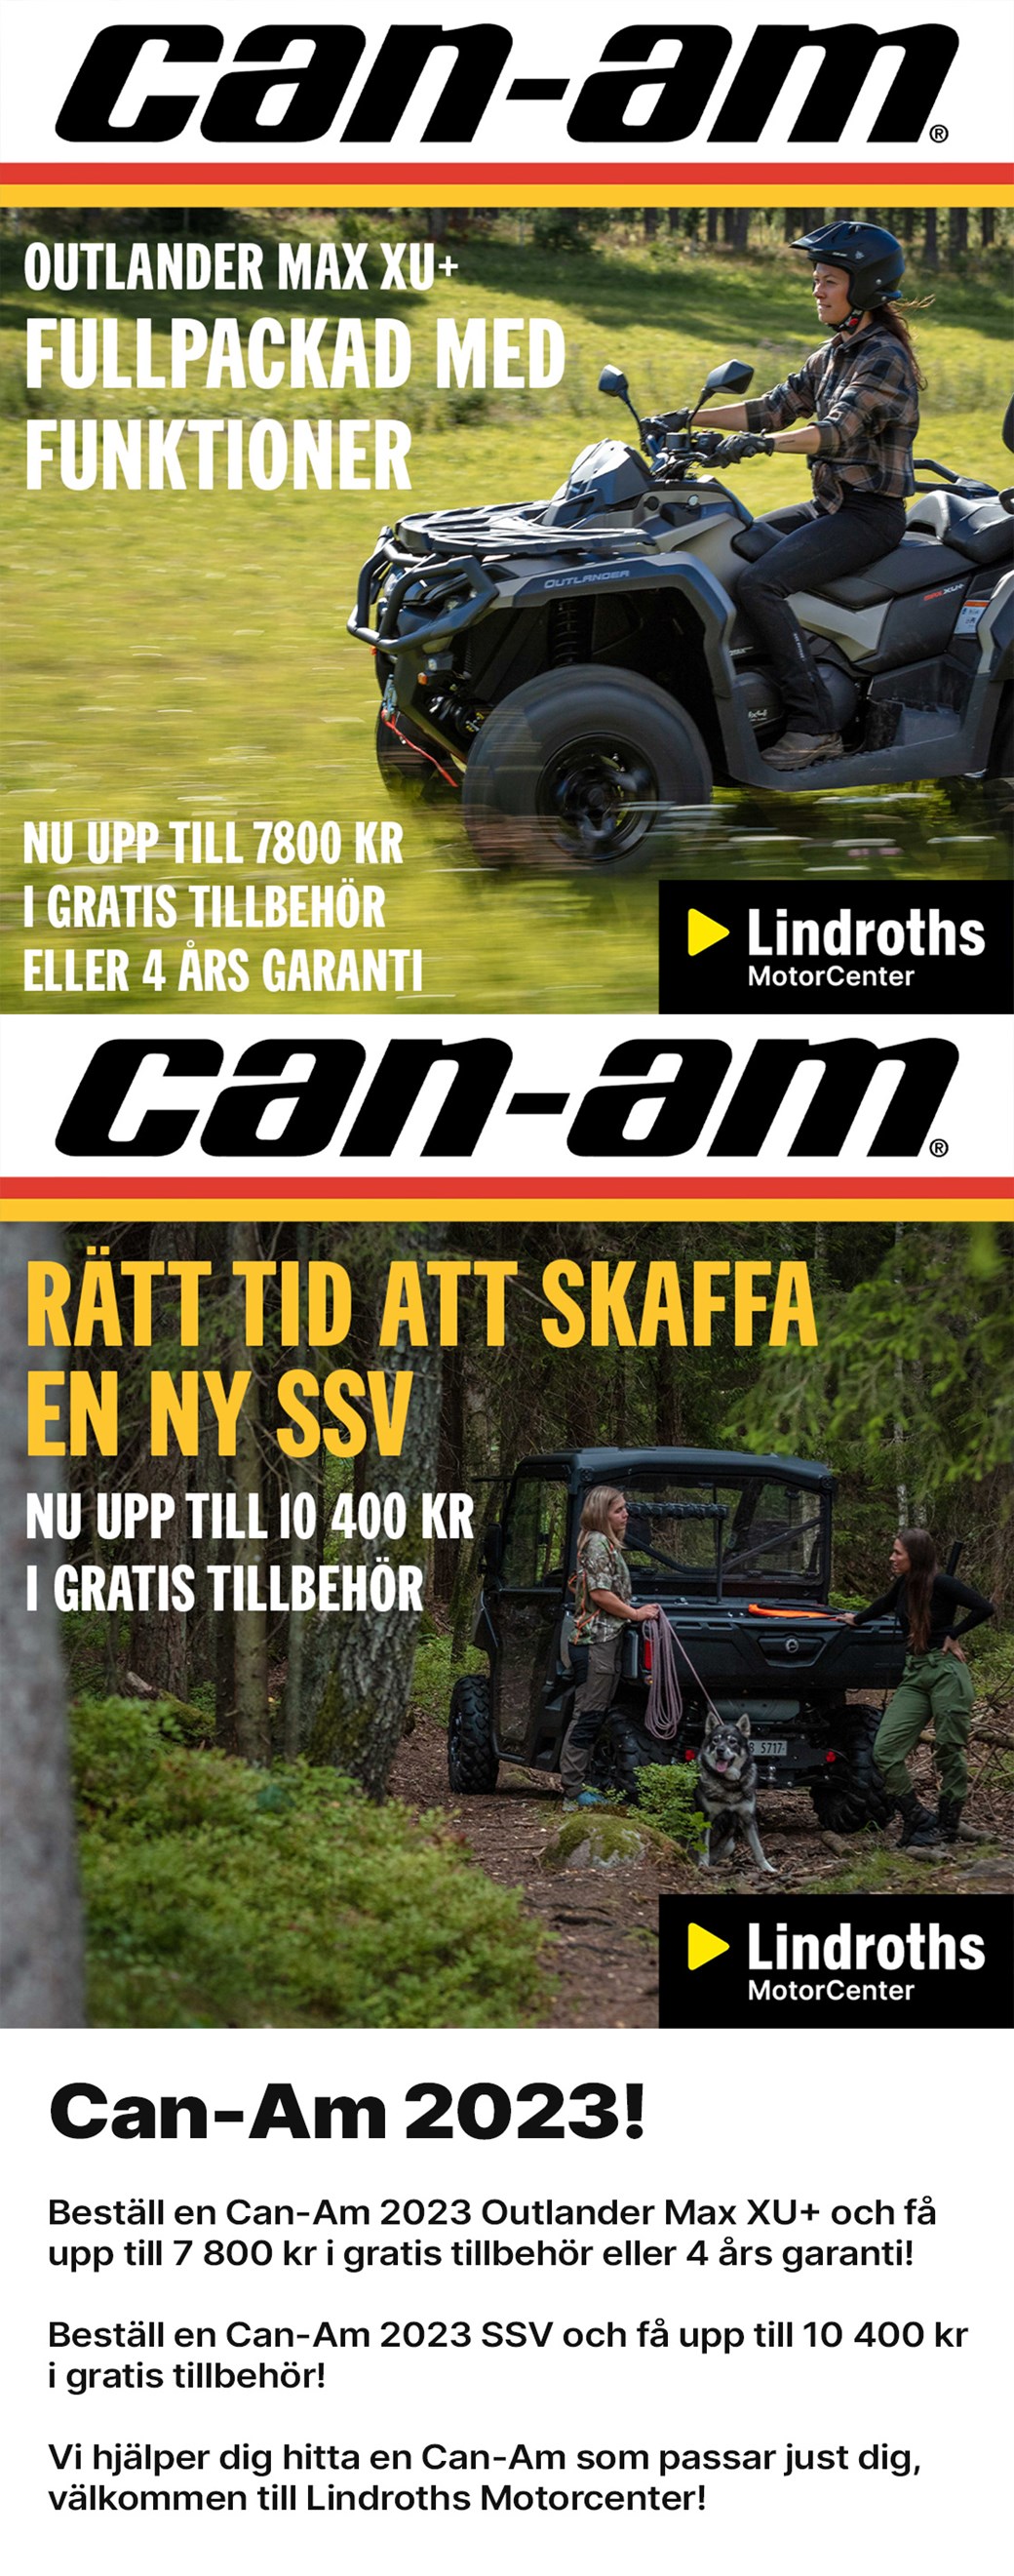 Can-Am 2023!